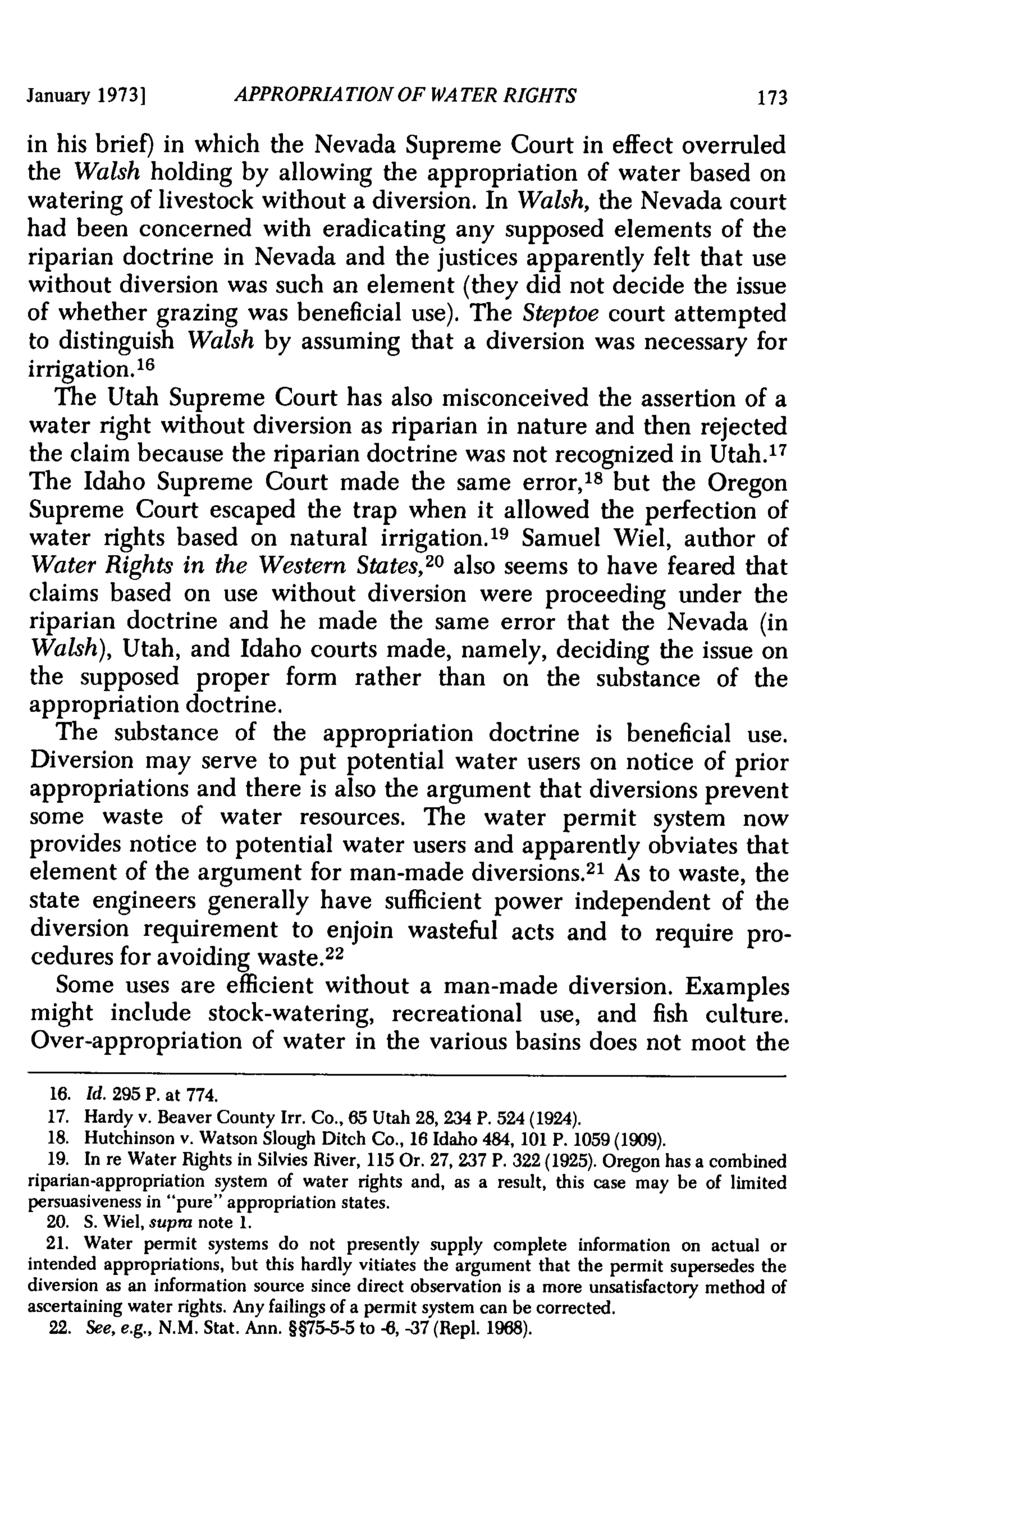 J anuary 19731 APPROPRIATION OF WATER RIGHTS in his brief) in which the Nevada Supreme Court in effect overruled the Walsh holding by allowing the appropriation of water based on watering of